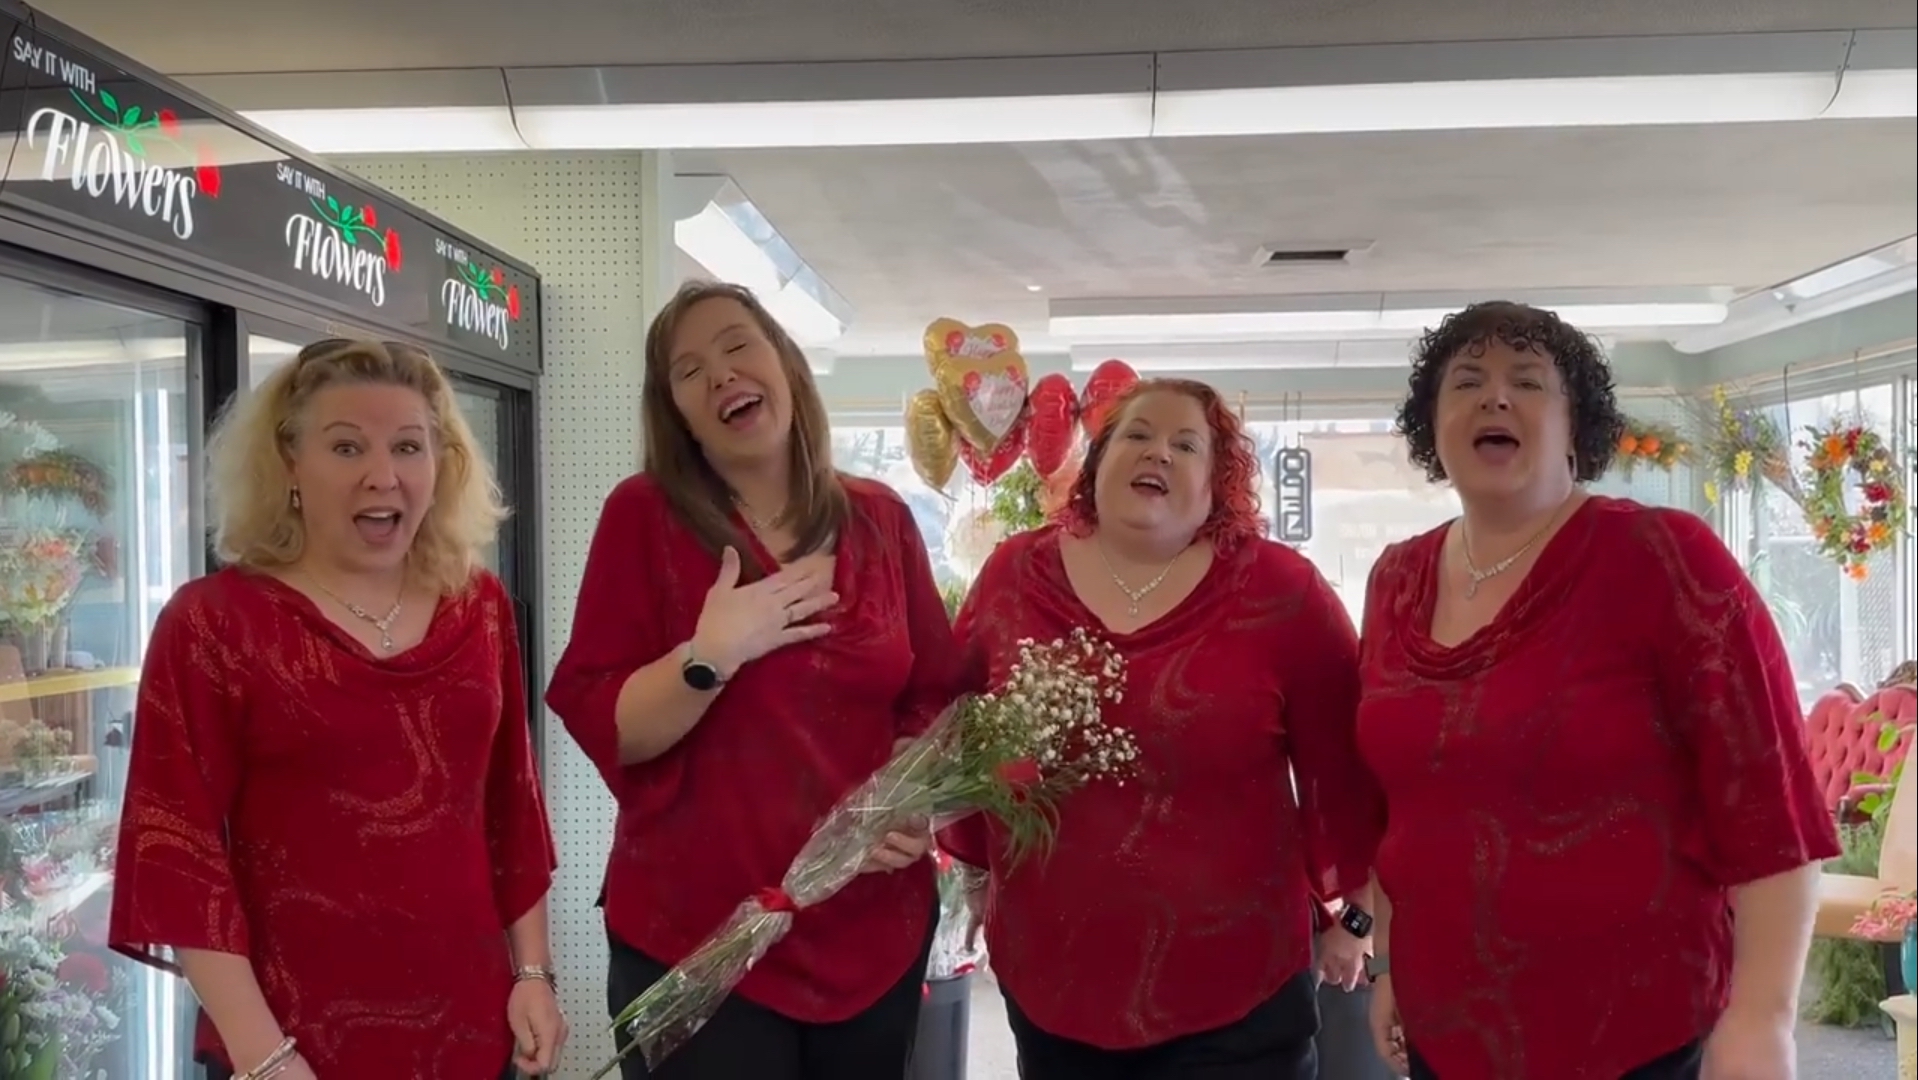 Singing valentines could be coming to your neighborhood